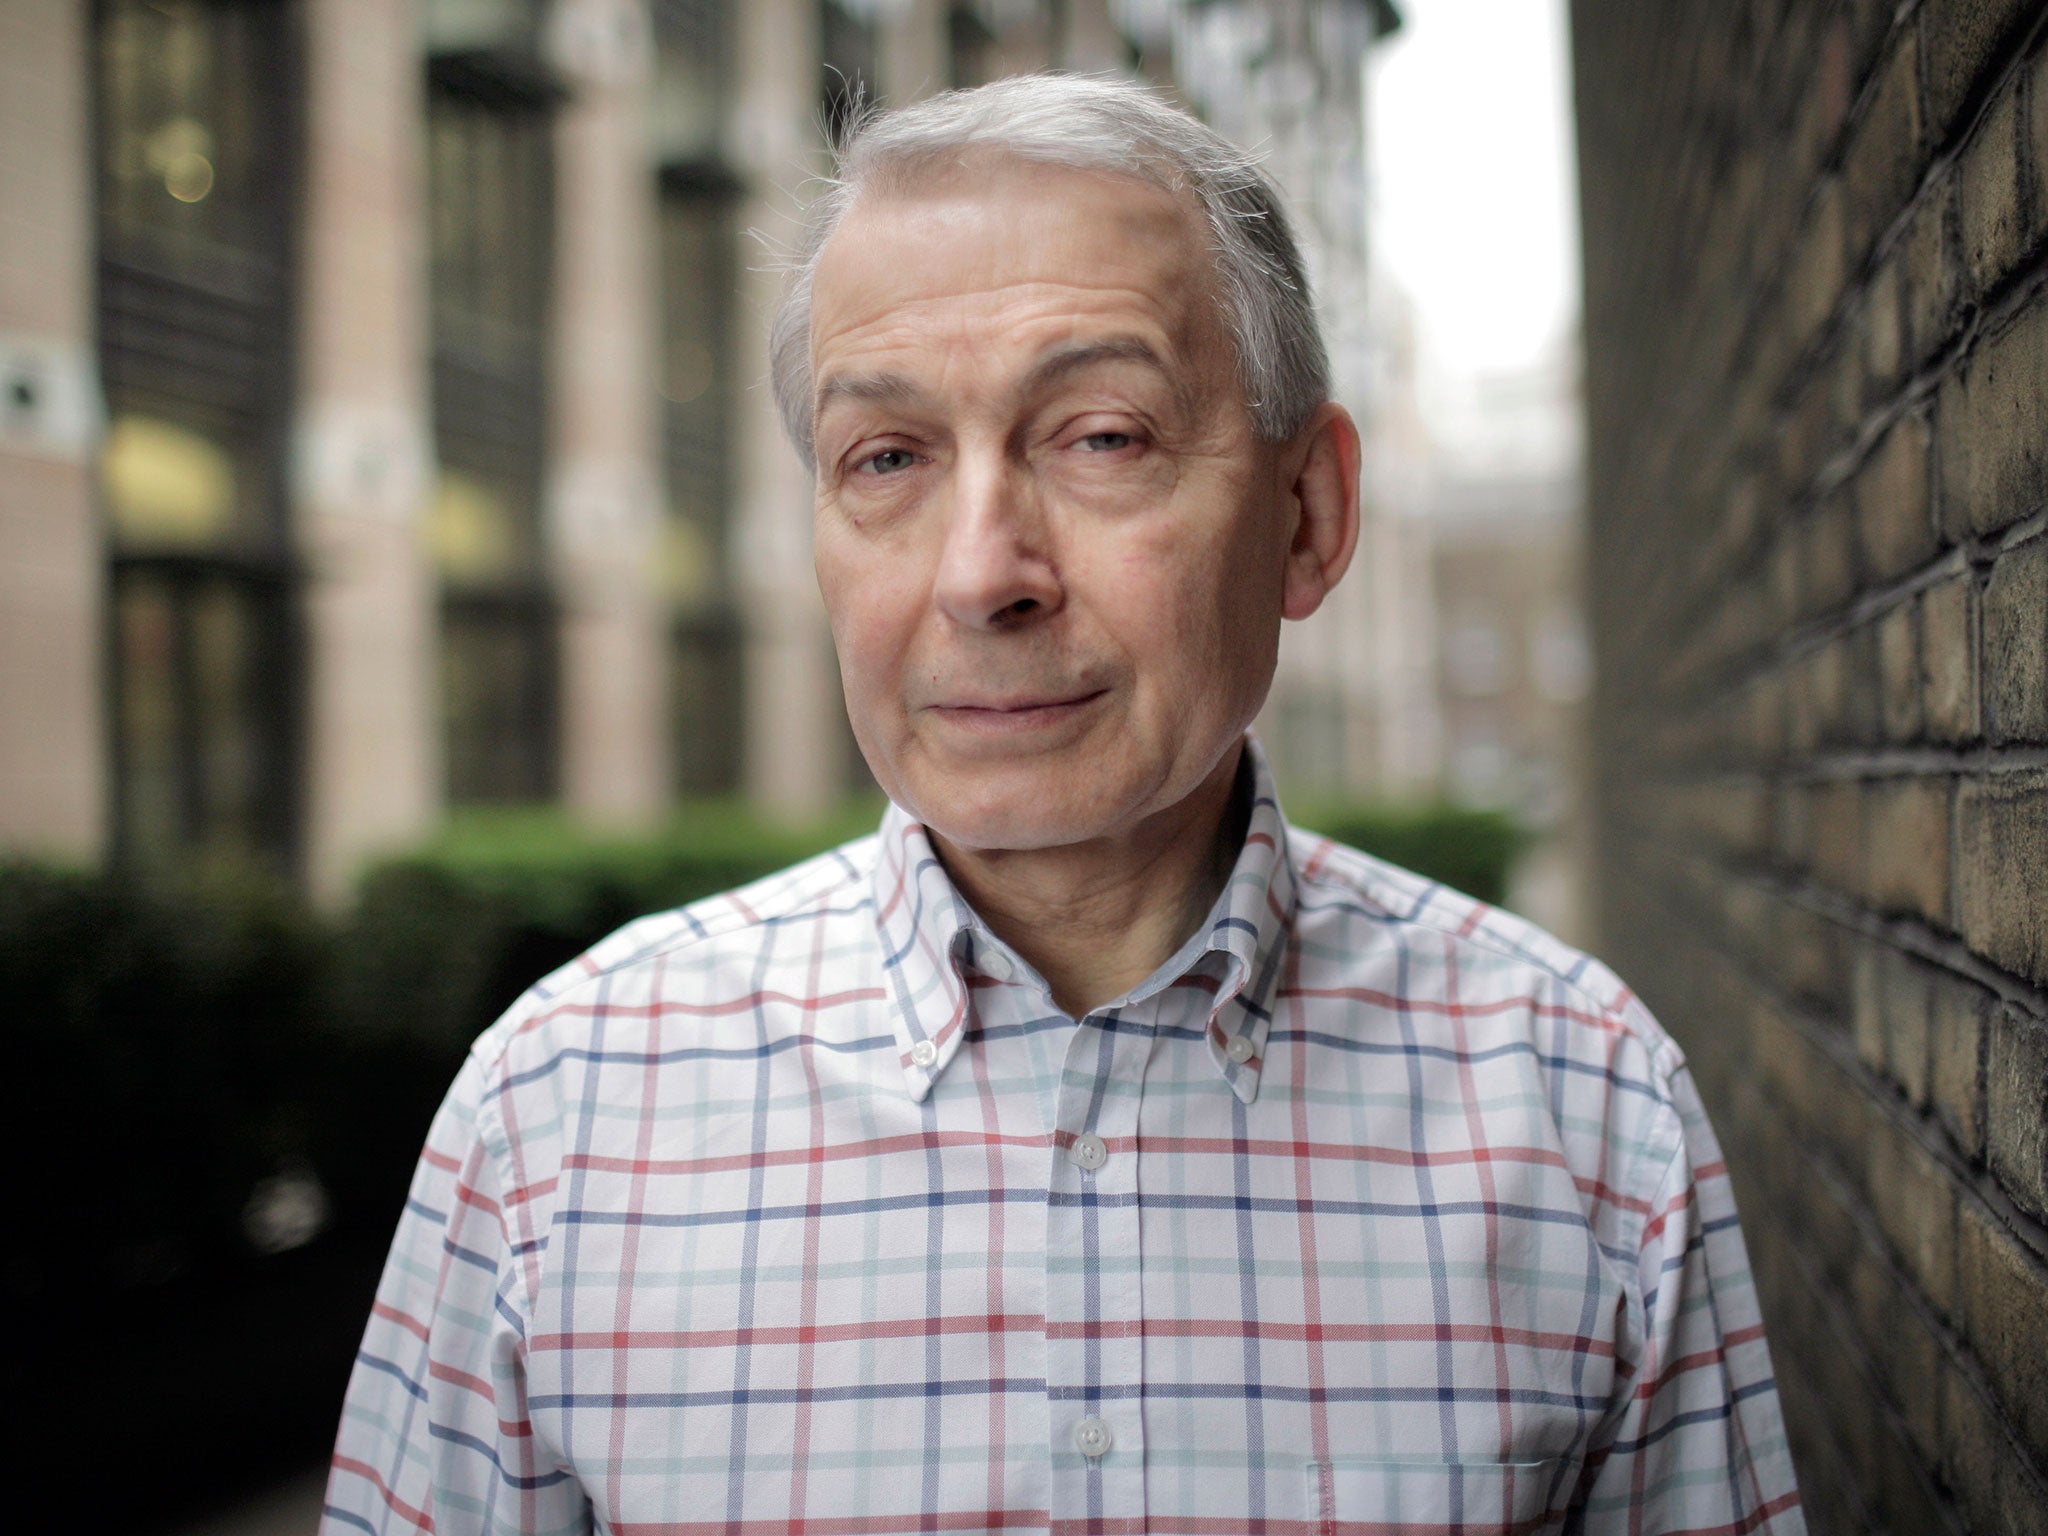 Labour MP Frank Field found that poor working families who claim tax credits forfeit free school meals